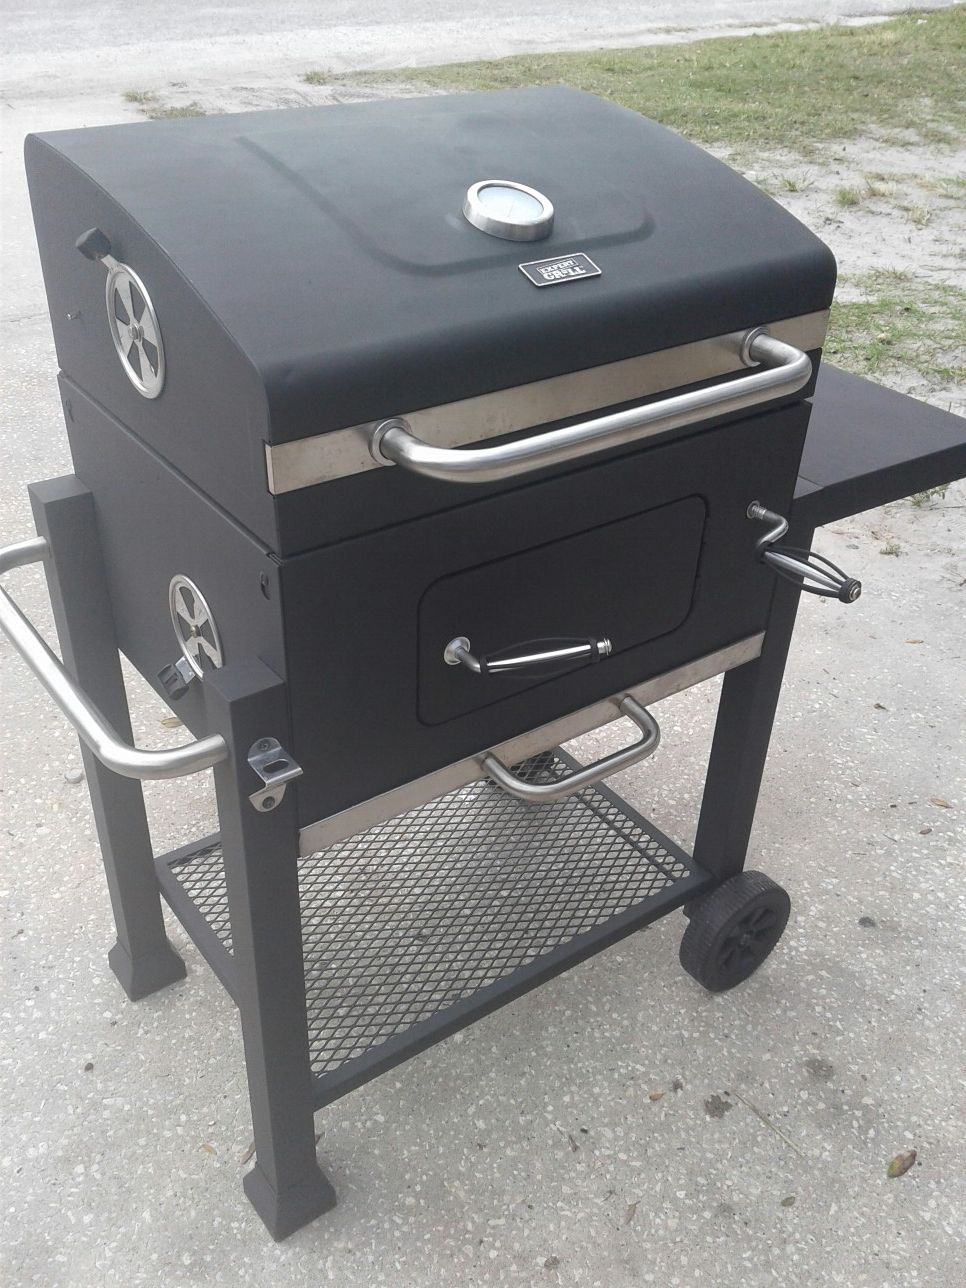 Almost New charcoal grill!!!! I will deliver depending on location